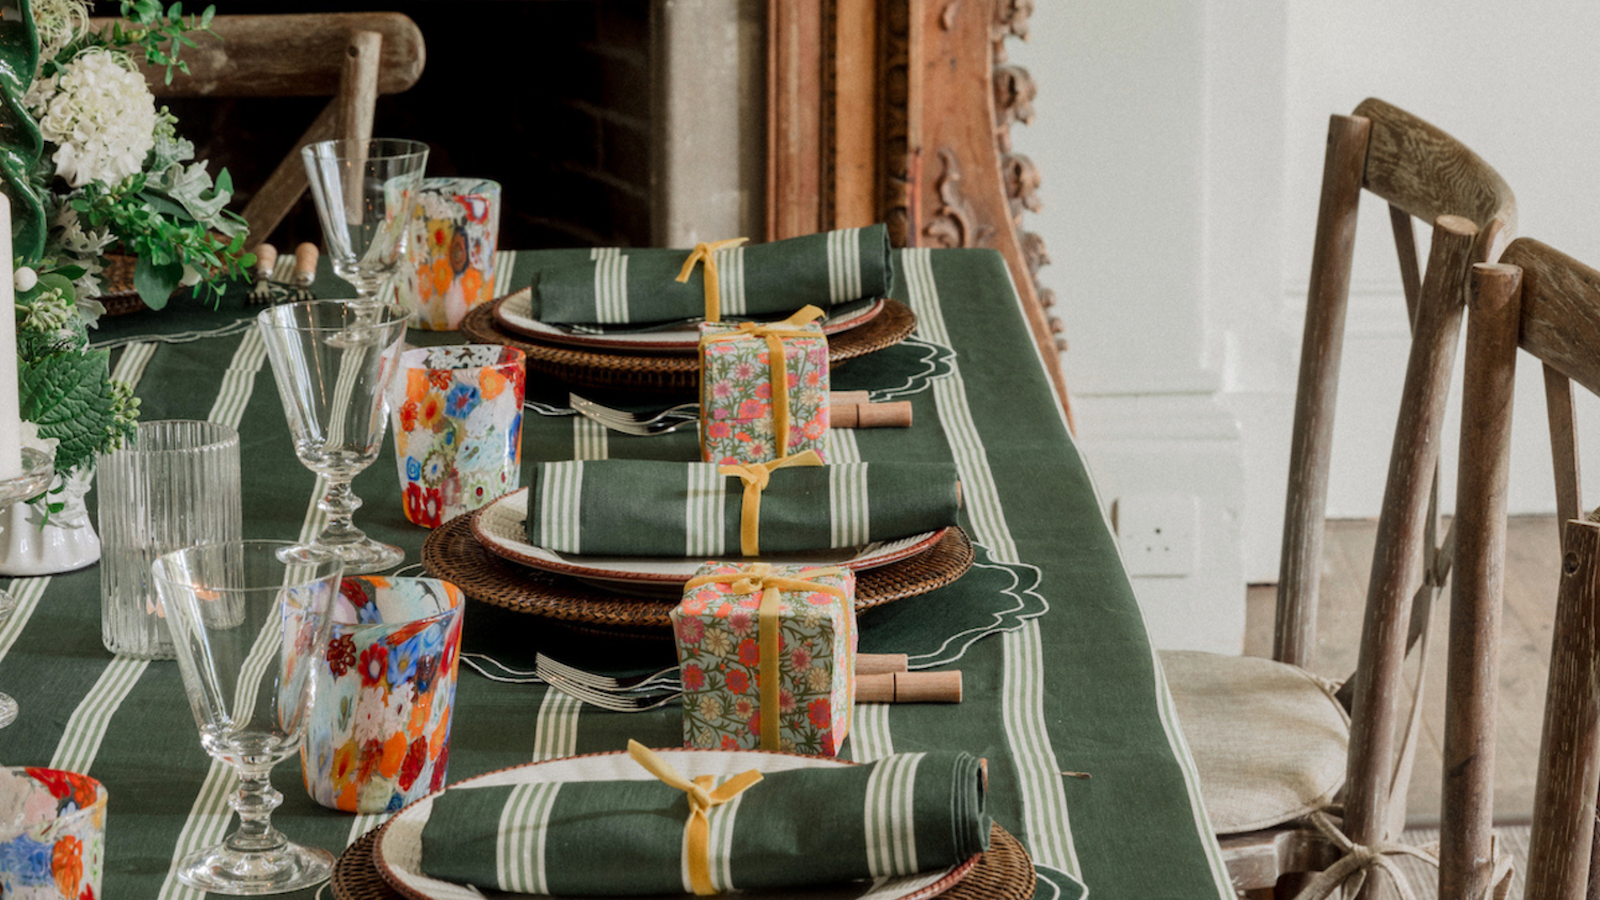 Summer Tablecloths For Alfresco Feasts, From £19